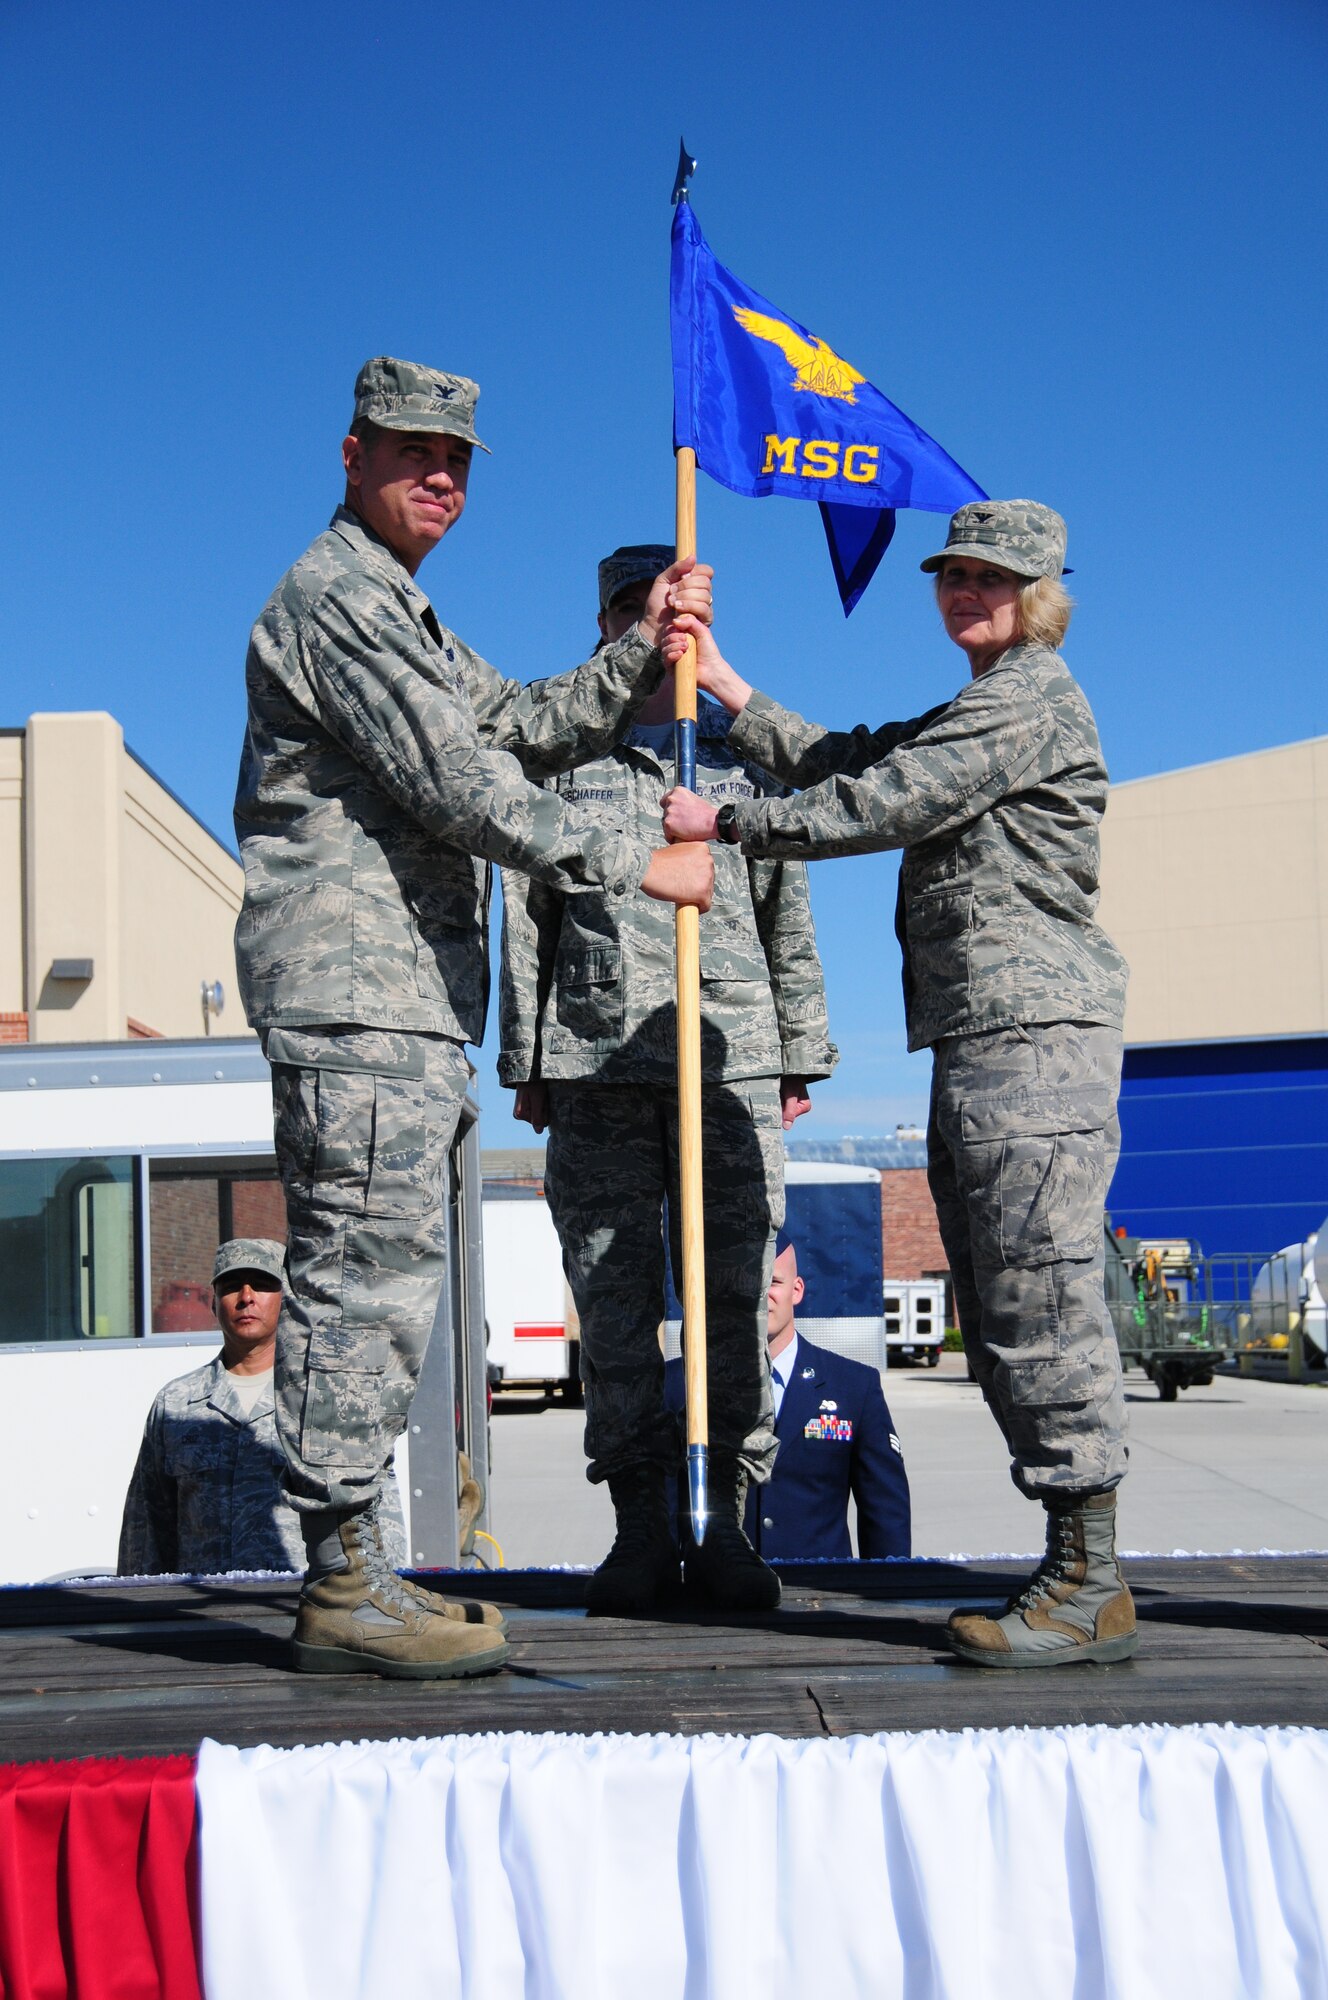 Col. Shelley R. Campbell, right, accepts command of the 153rd Mission Support Group from Col. Michael R. Taheri, 153rd Airlift Wing commander, during a ceremony Aug. 4, 2013 at the Wyoming Air National Guard Base, Cheyenne, Wyo. The passing of the guidon is a symbolic gesture in front of an entire unit to witness a new leader assume their dutiful position. (U.S. Air National Guard photo by Capt. Rusty Ridley)